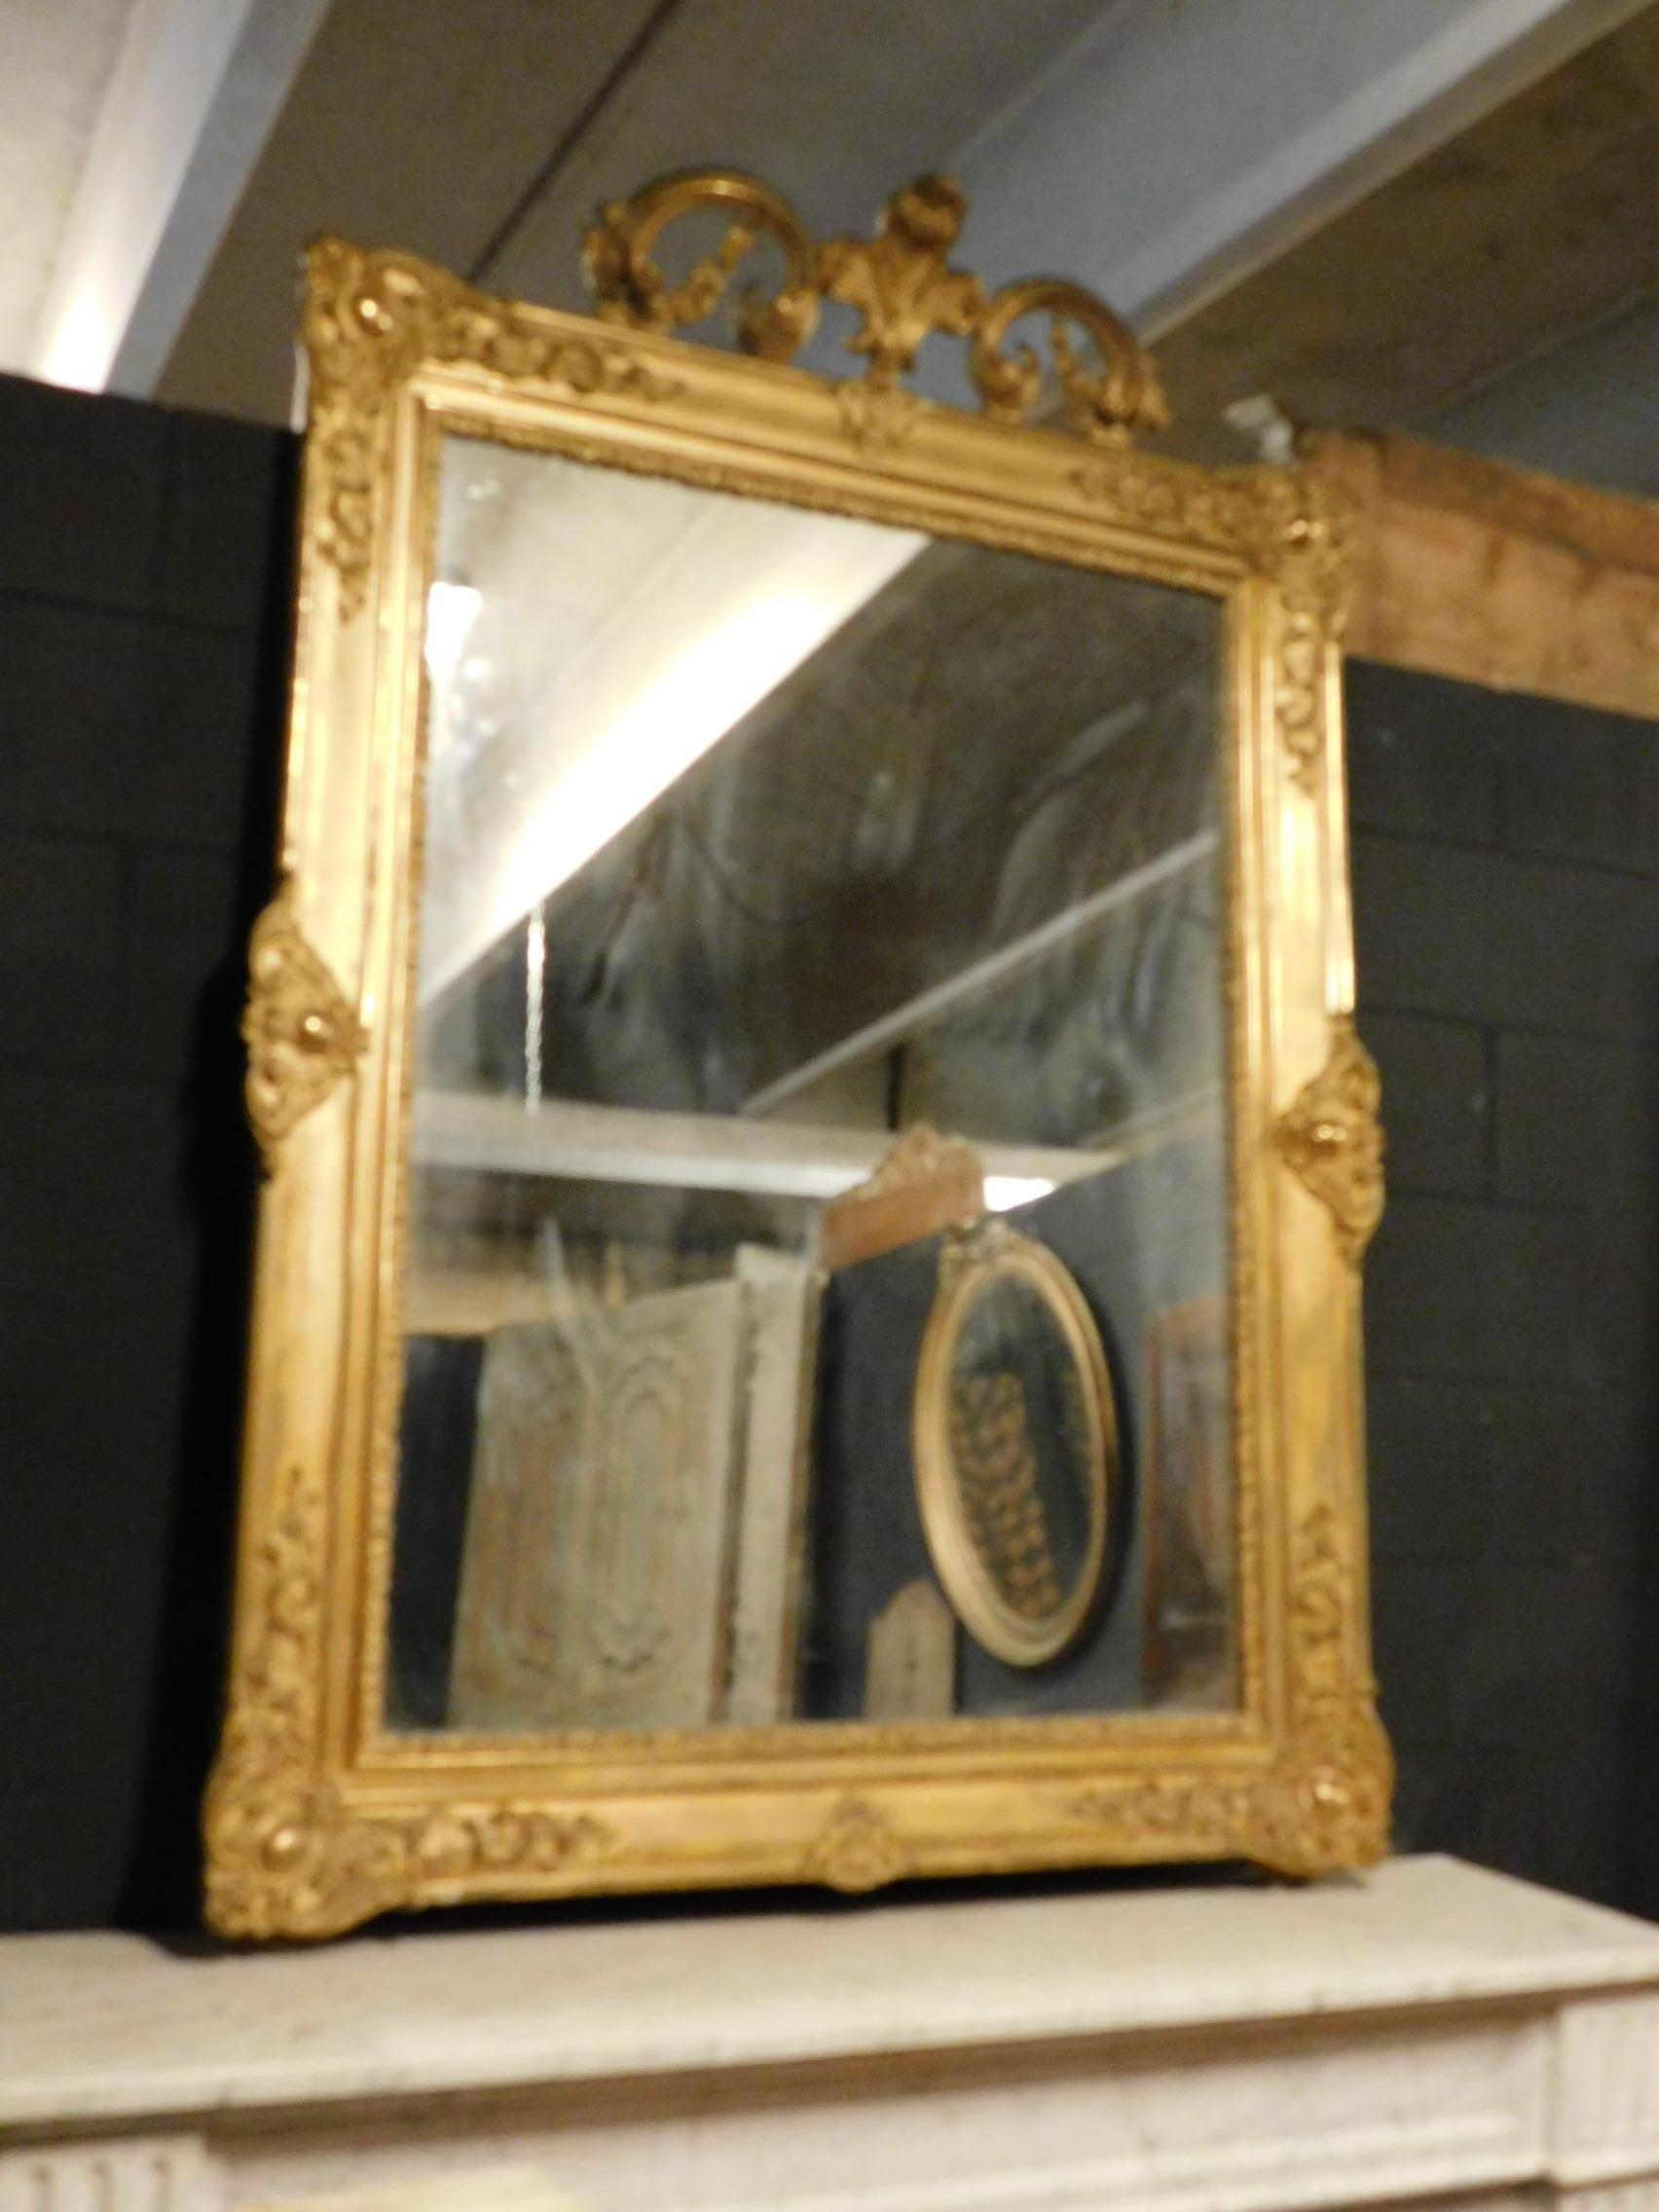 Antique gilded wood mirror with large carved molding, rear mirror to see yourself better, beautiful in size, precision of carving and antiquity, luxurious to furnish a fireplace or an elegant and cool room, coming from Italy, 19th century.